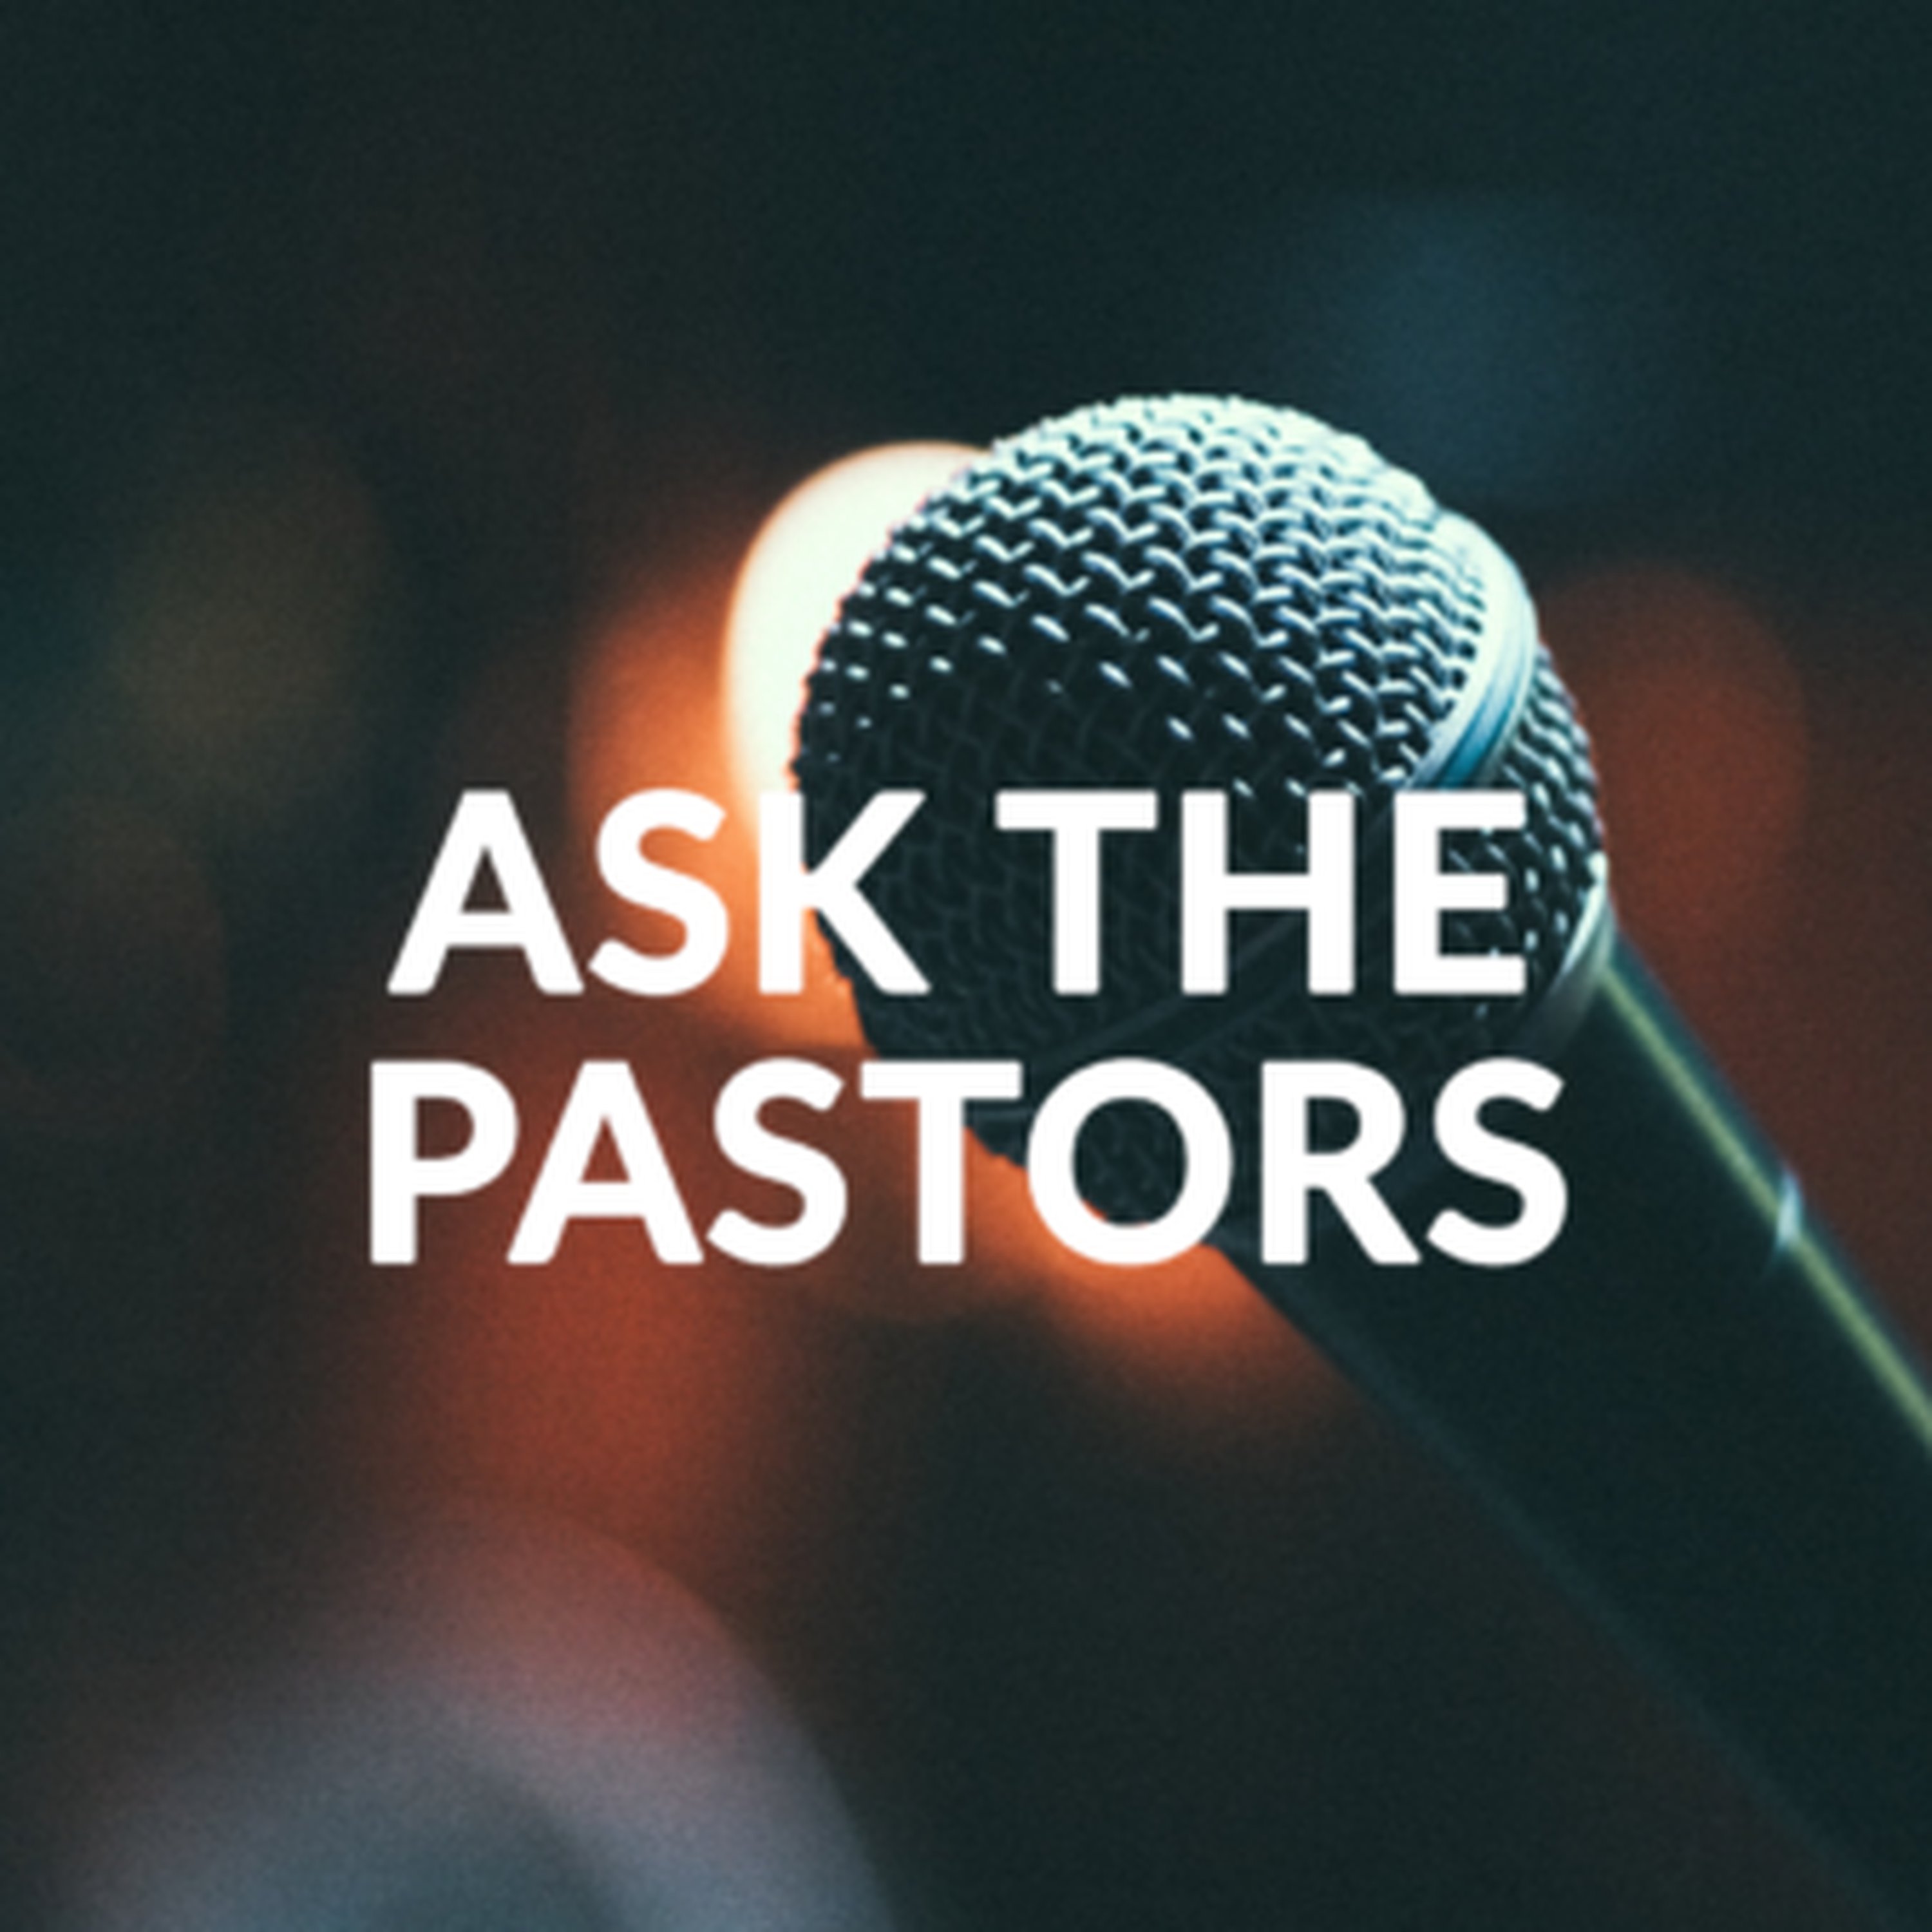 Ask the Pastors: What Does "God is Good" Mean?